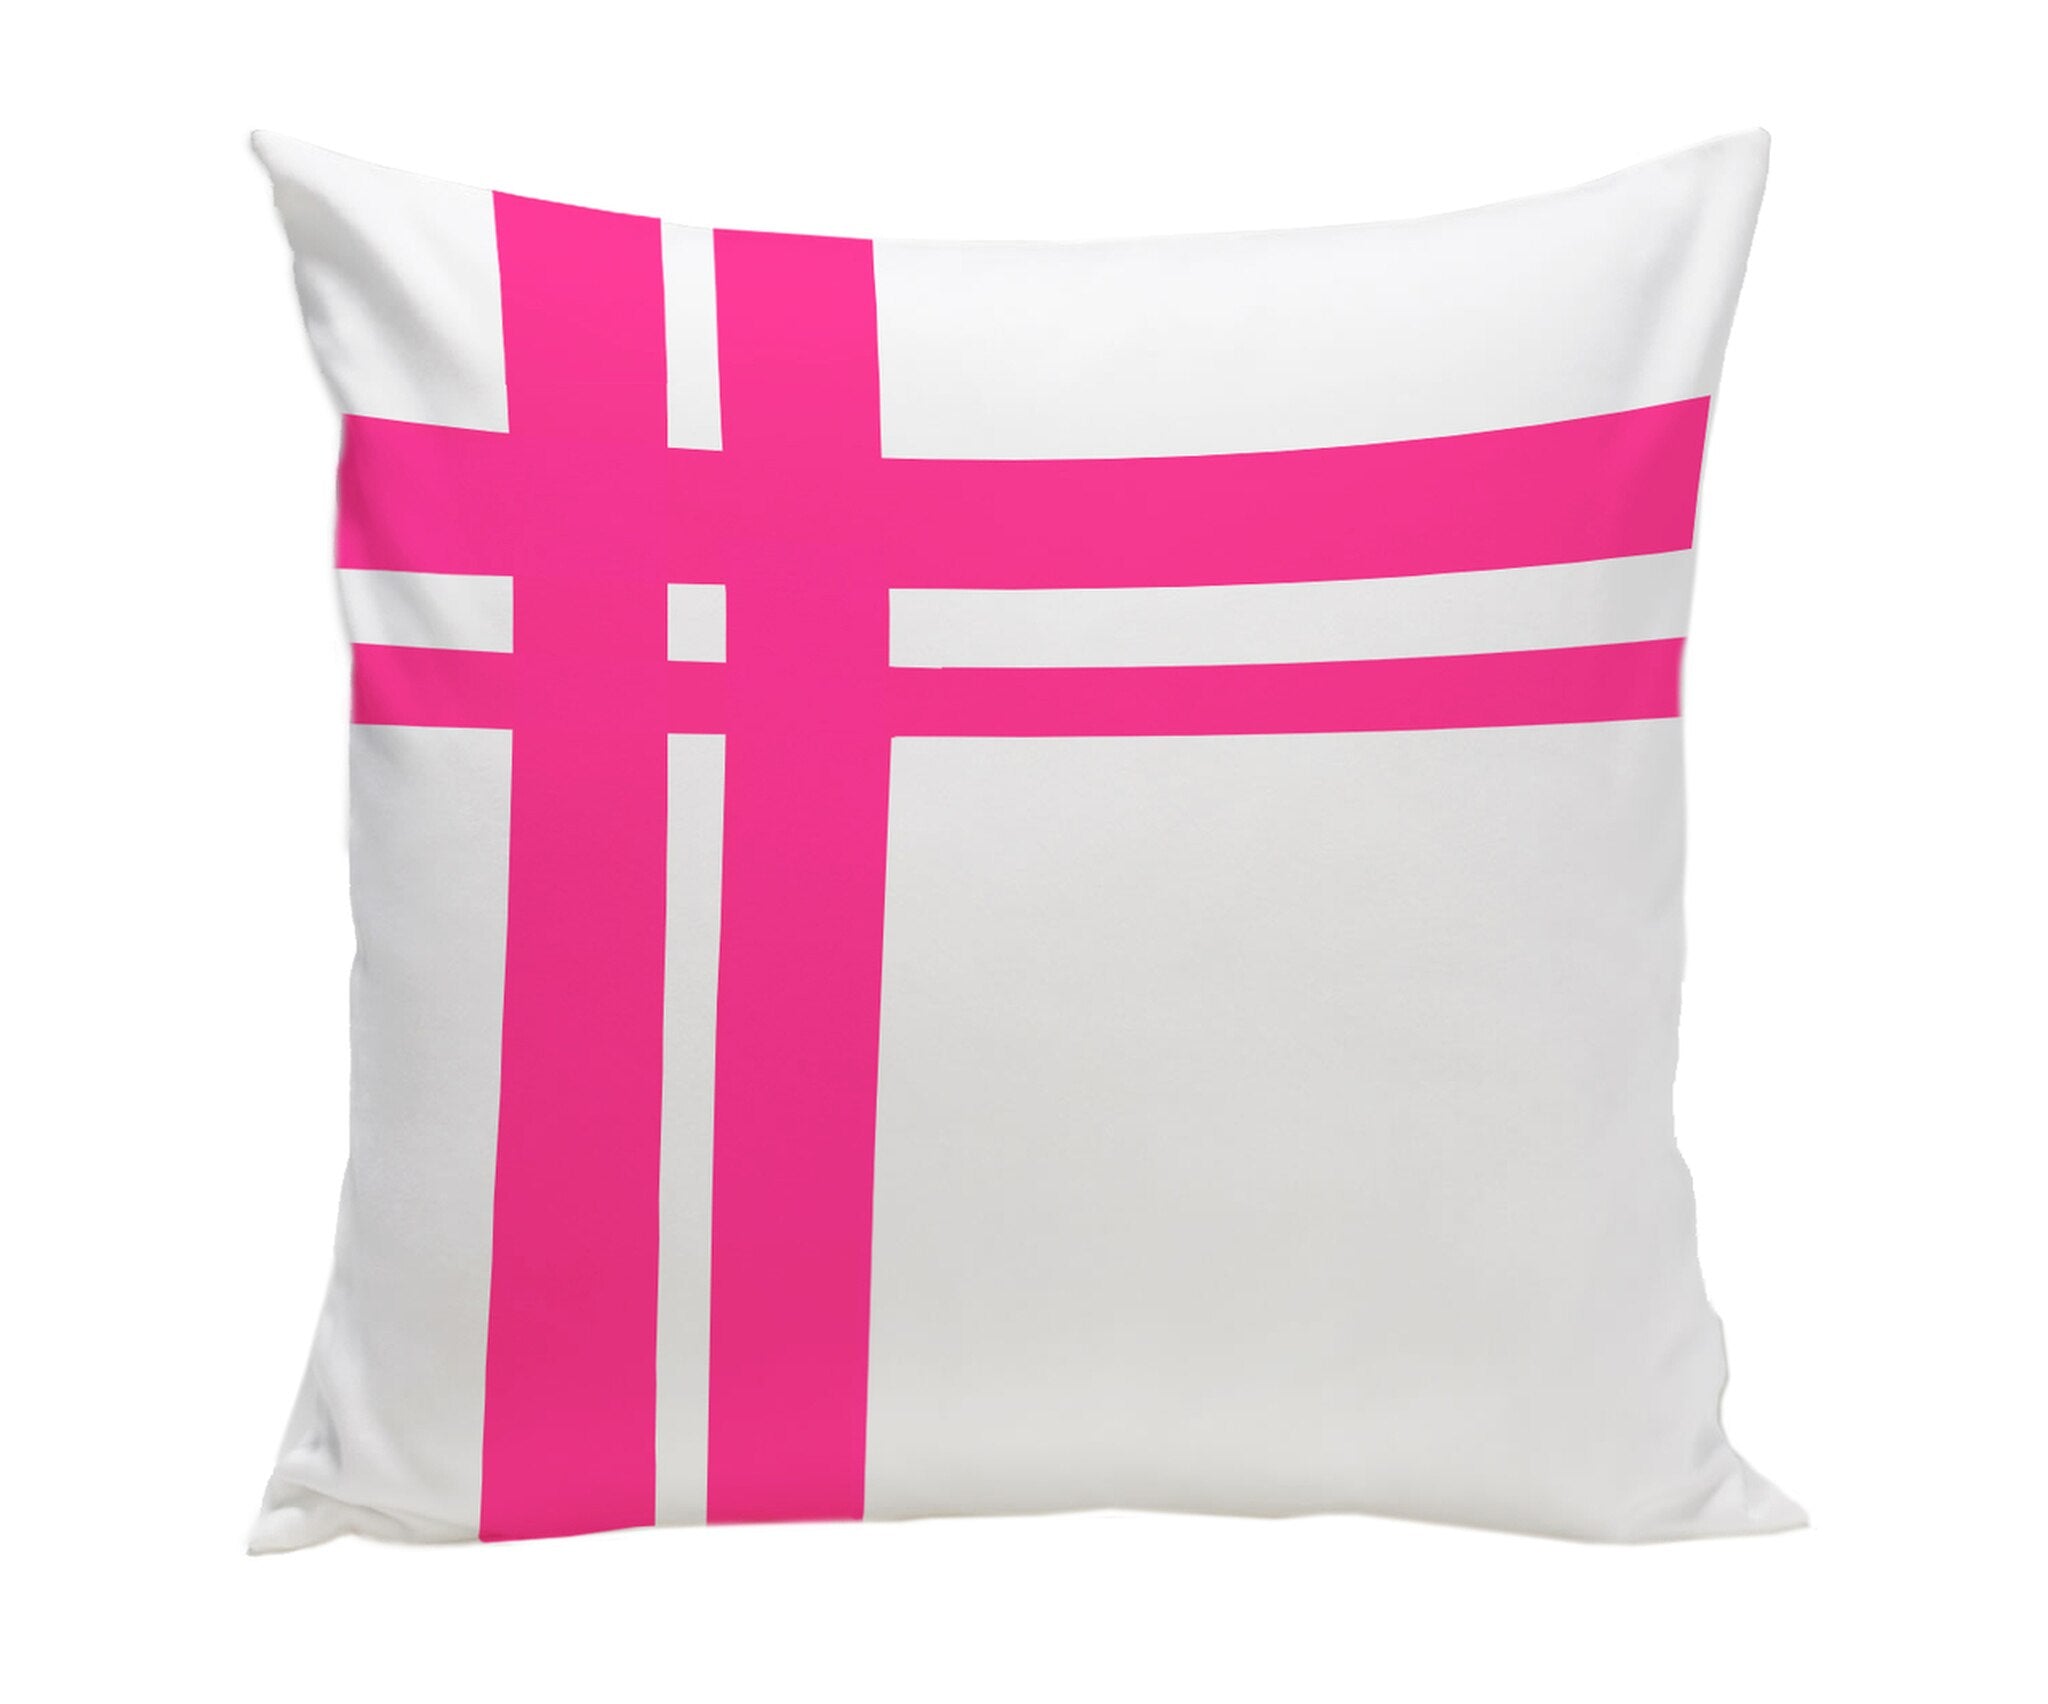 Spot On Square Modern Accent Pillows